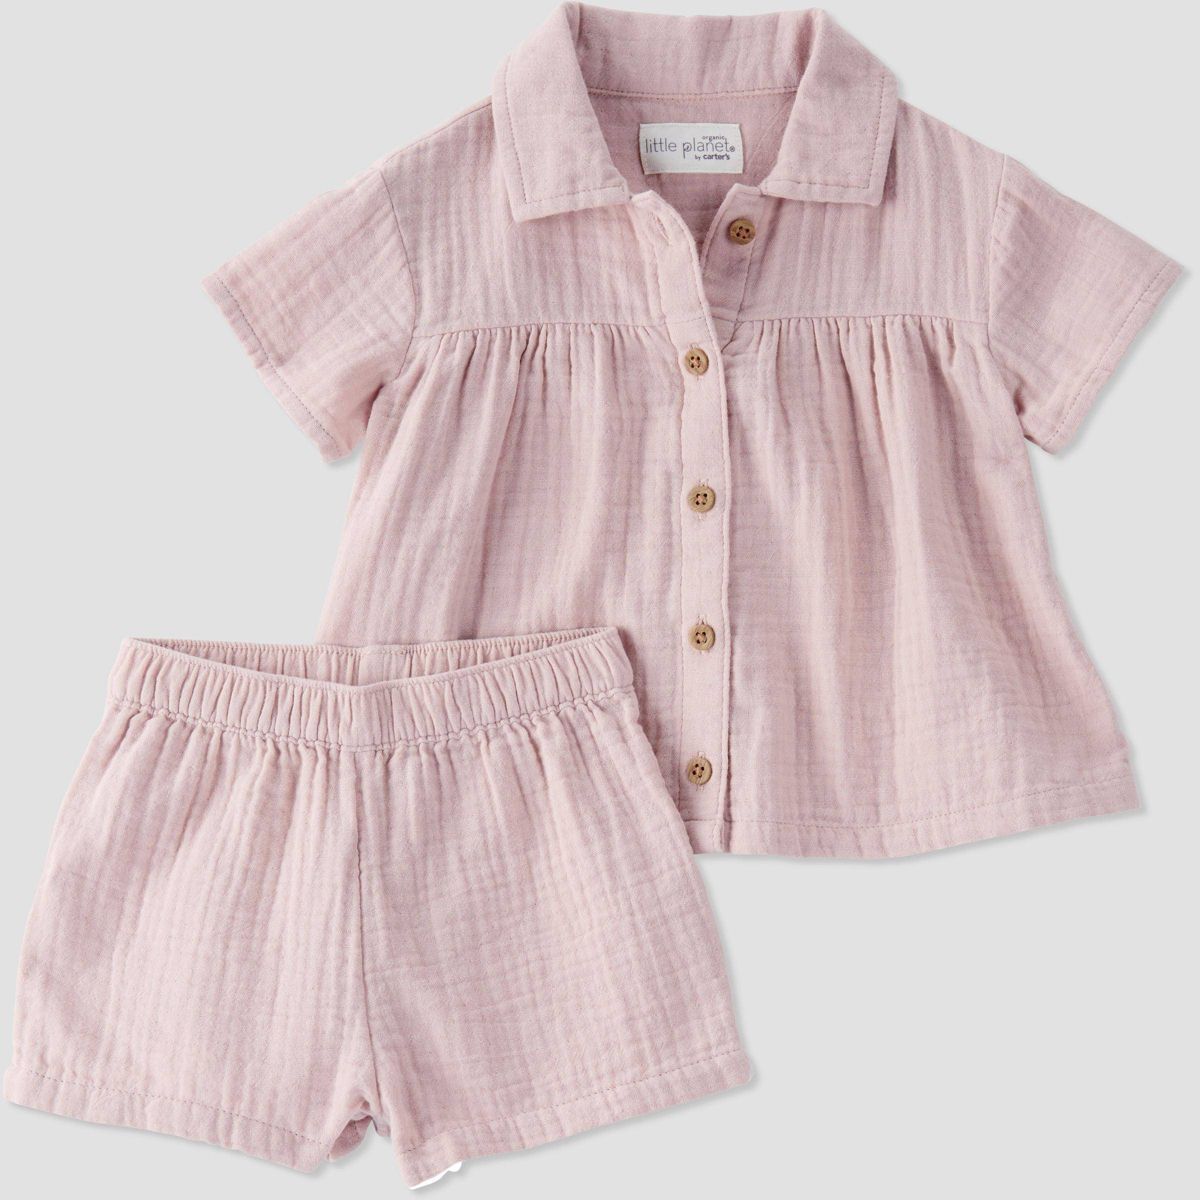 Little Planet by Carter’s Organic Baby Girls' 2pc Coordinate Set - Pink | Target